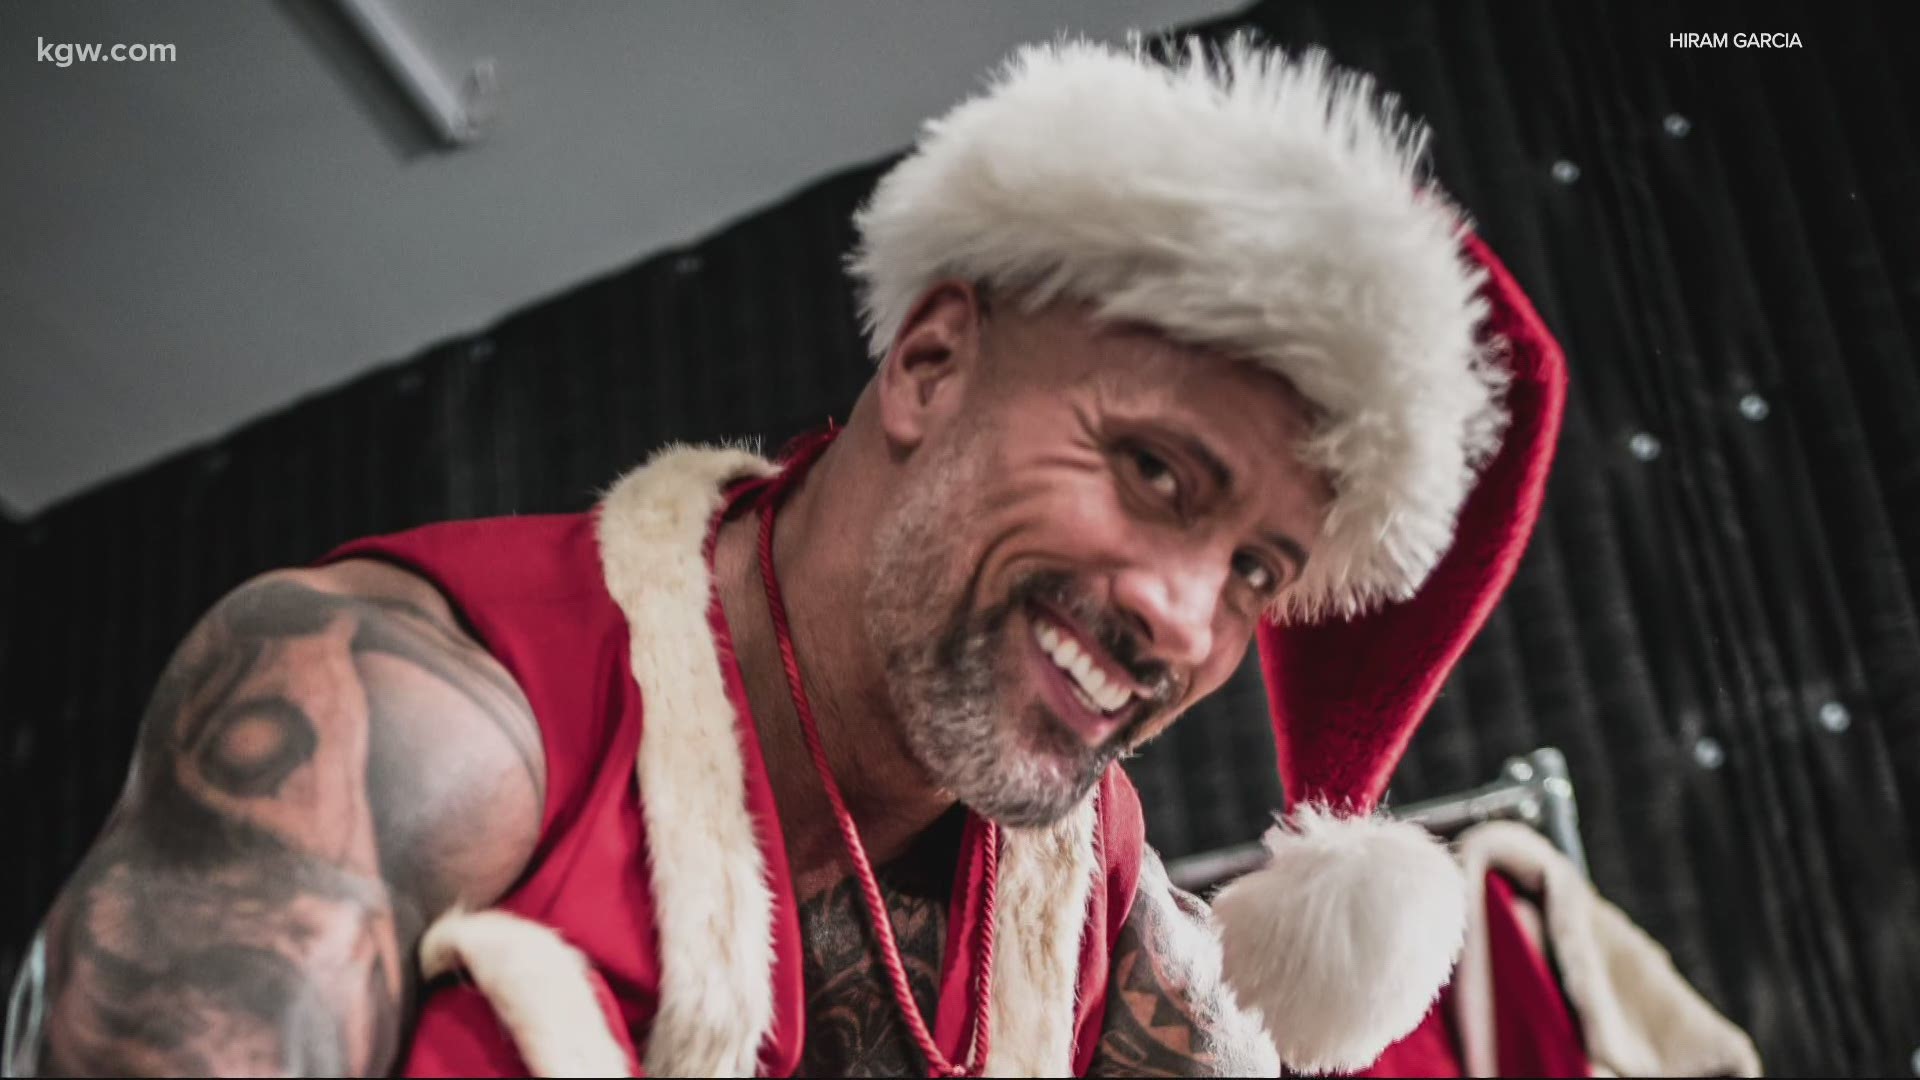 Salt & Straw is again teaming up with Dwayne "The Rock" Johnson for some festive flavors.